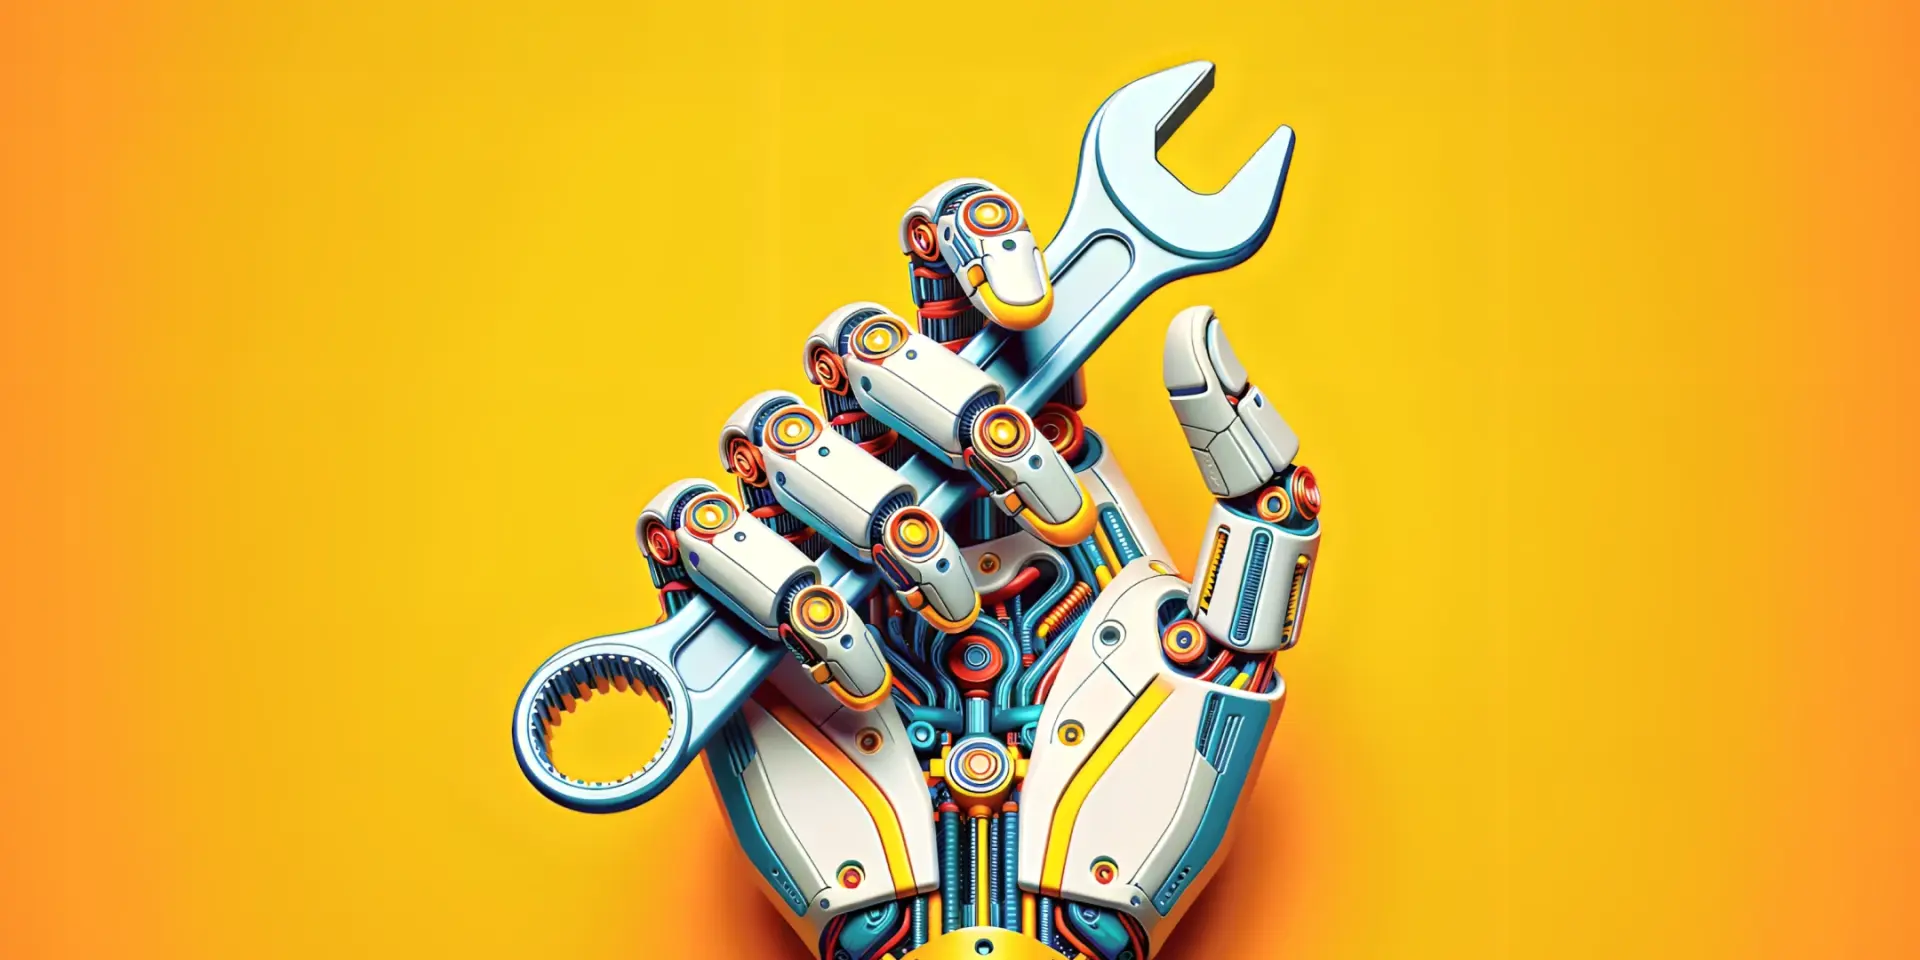 A robot hand holding a wrench on a yellow background